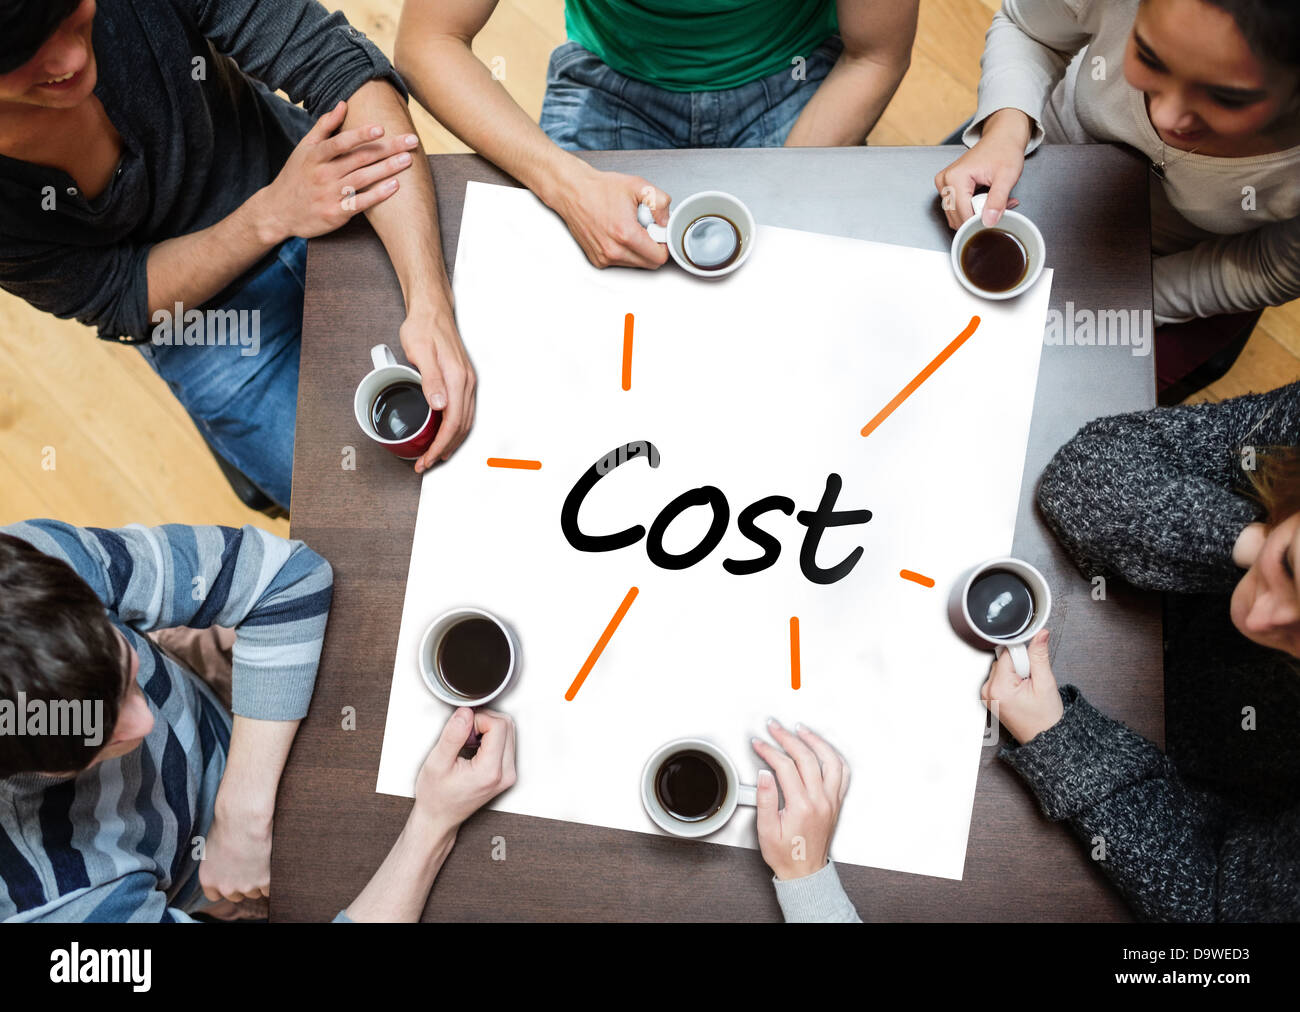 Team brainstorming over a poster with cost written on it Stock Photo